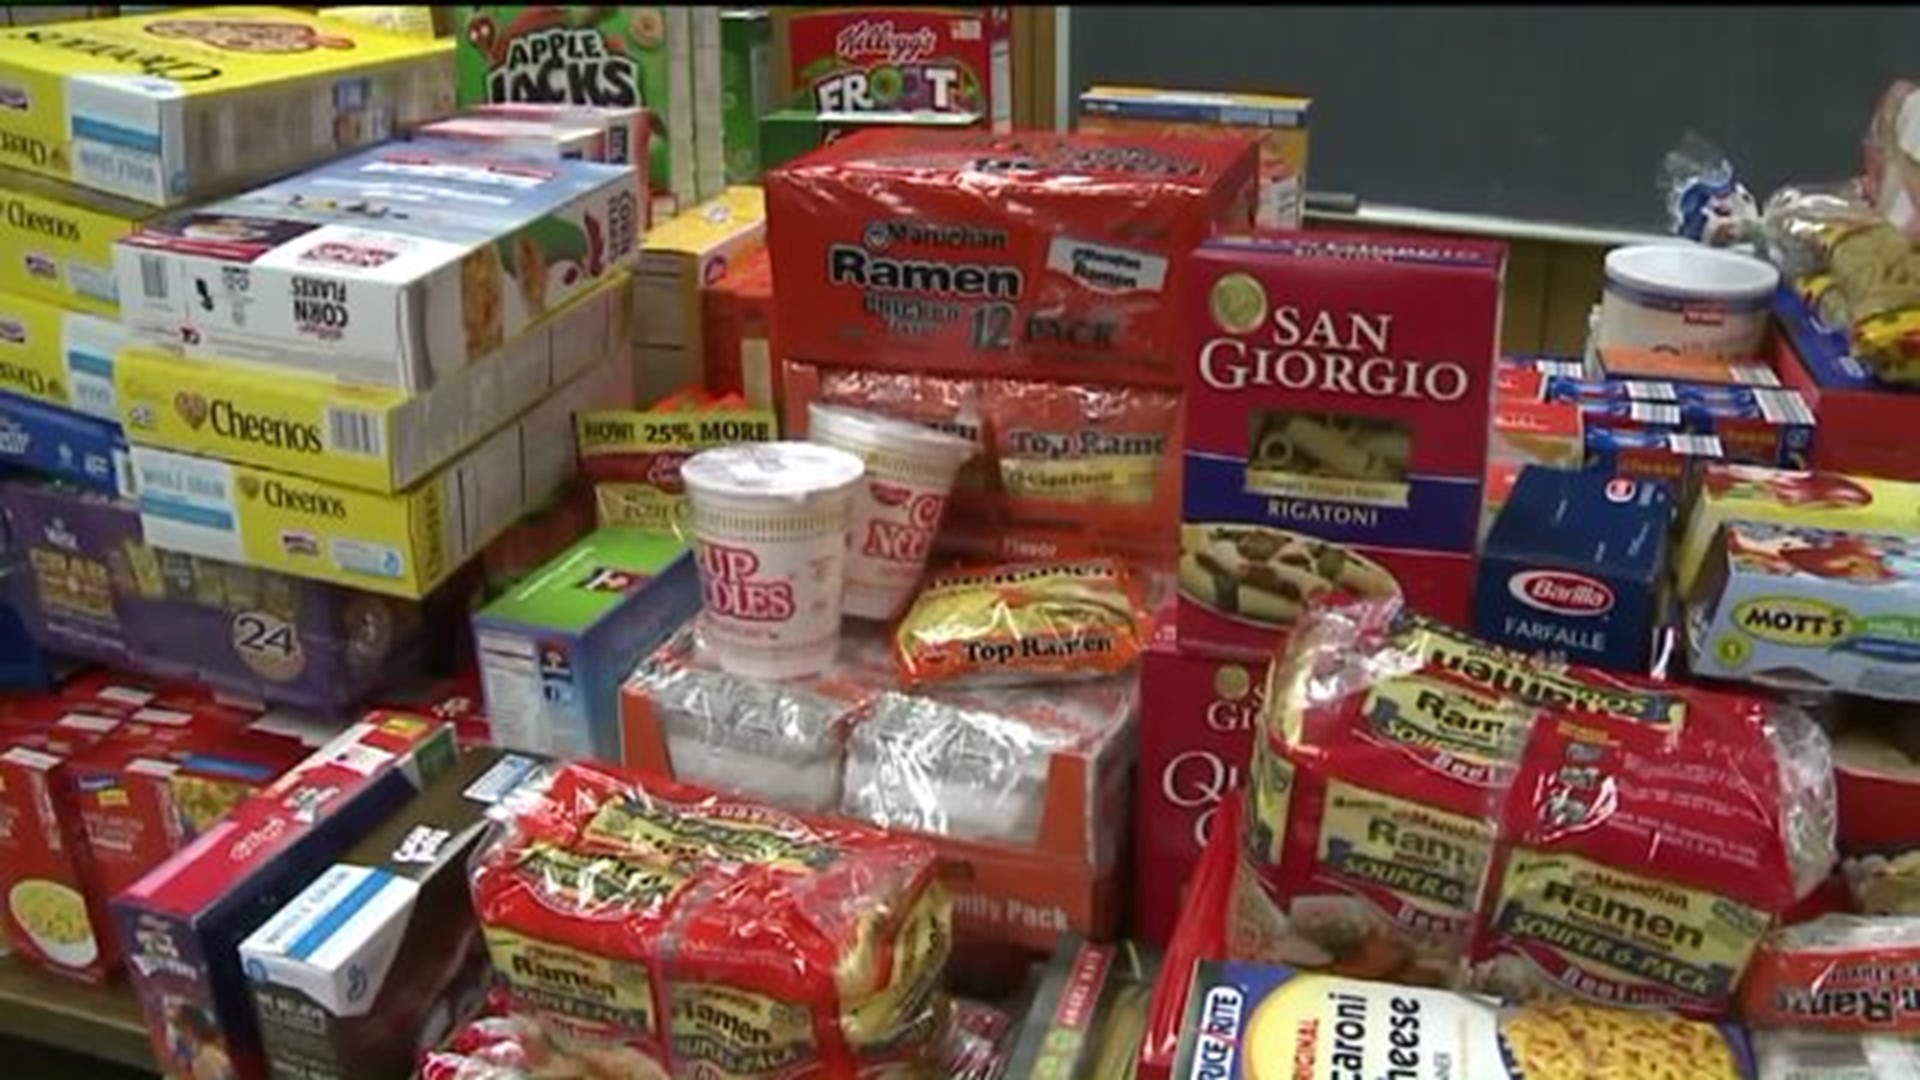 Striking Teachers Collect Food for Students in Need